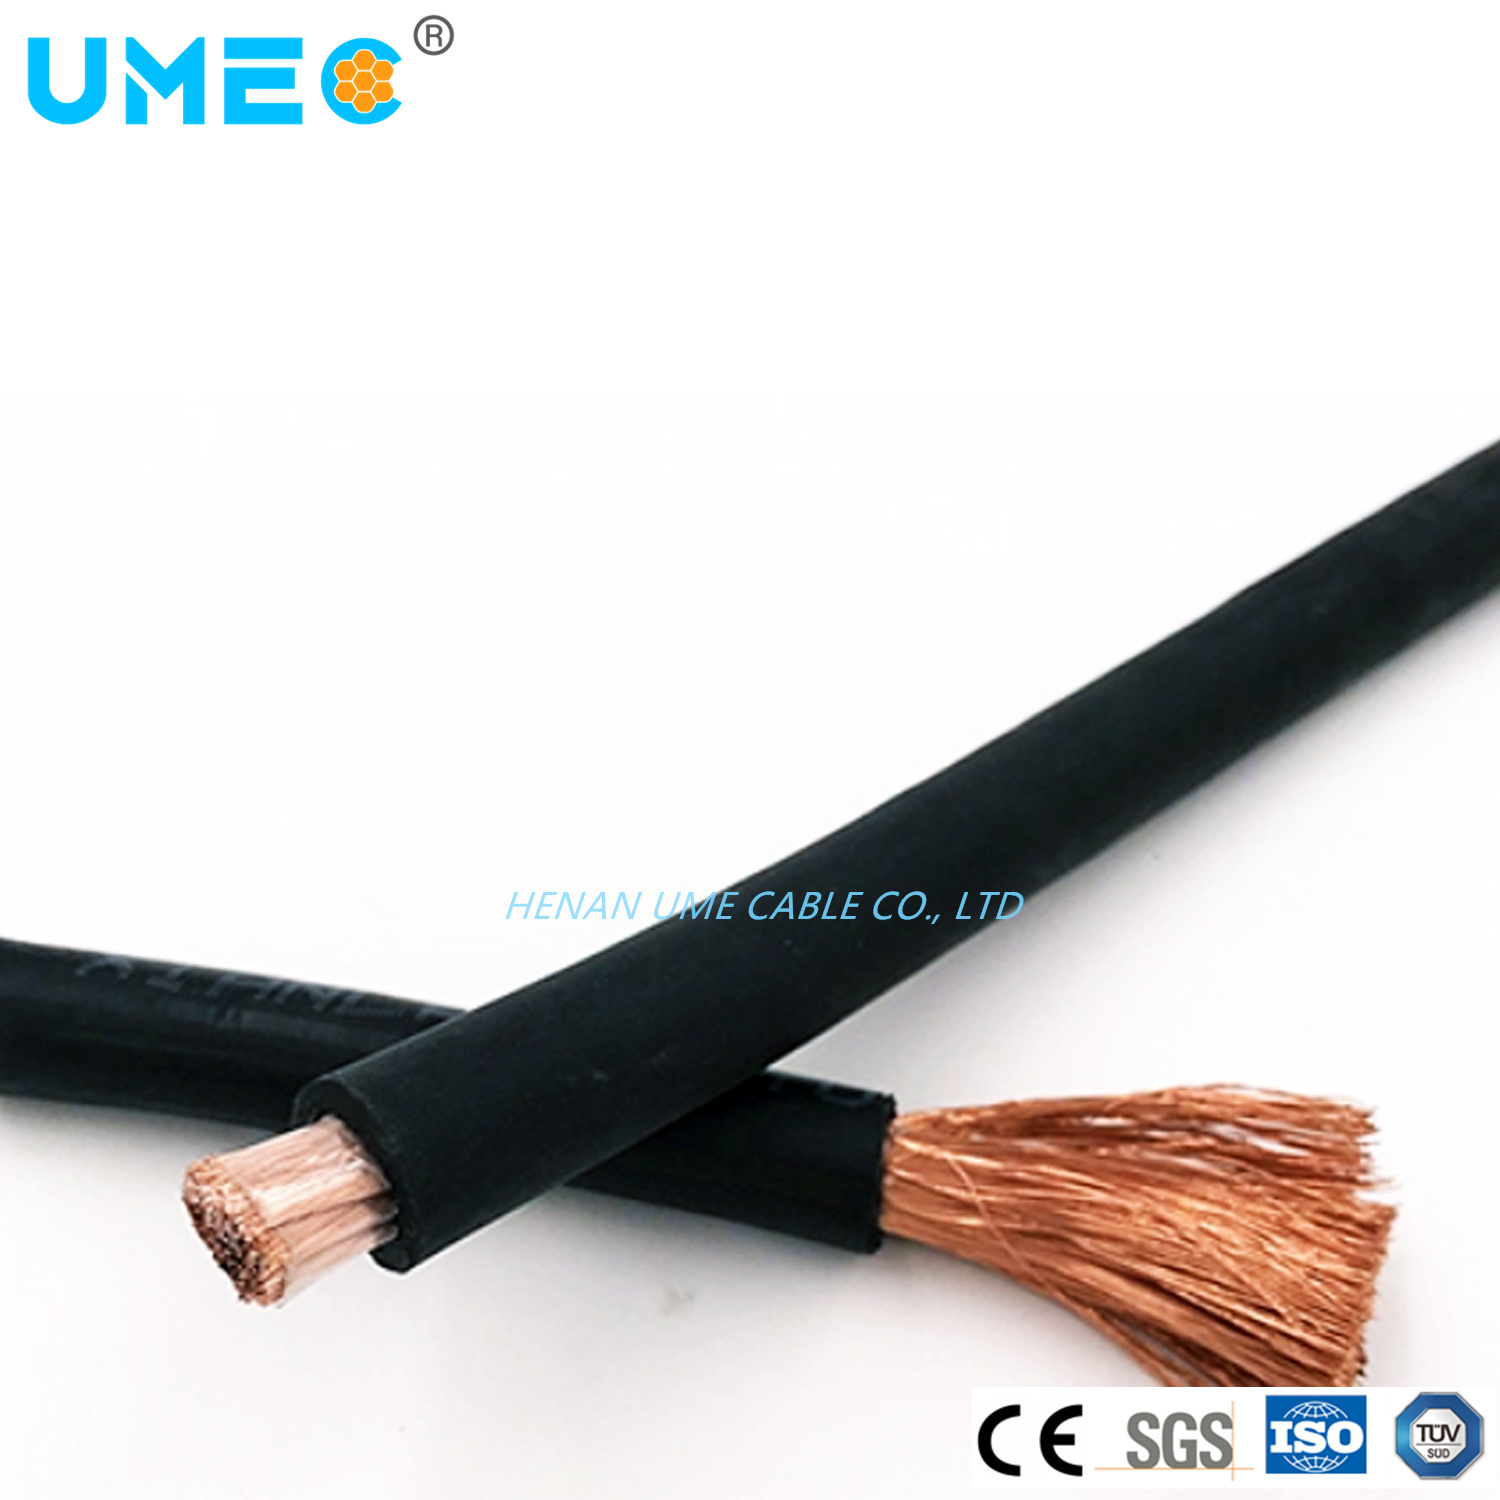 Ume Brand Factory Price Natural Rubber Sheath Welding Cable Yh Yhf